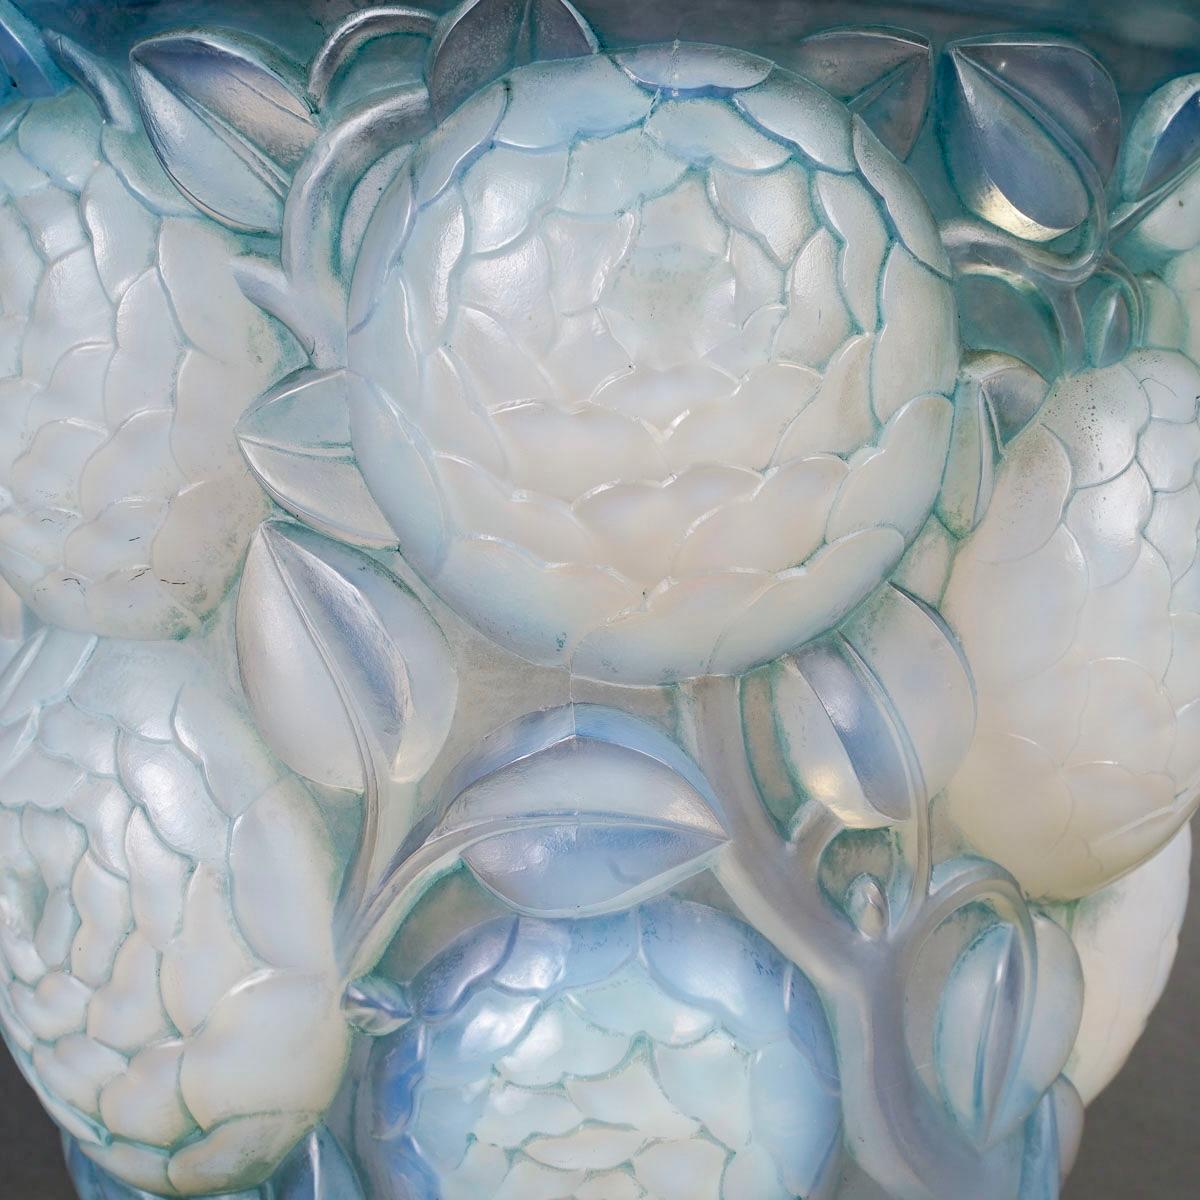 French 1927 Rene Lalique Vase Oran Opalescent Glass with Blue Patina For Sale